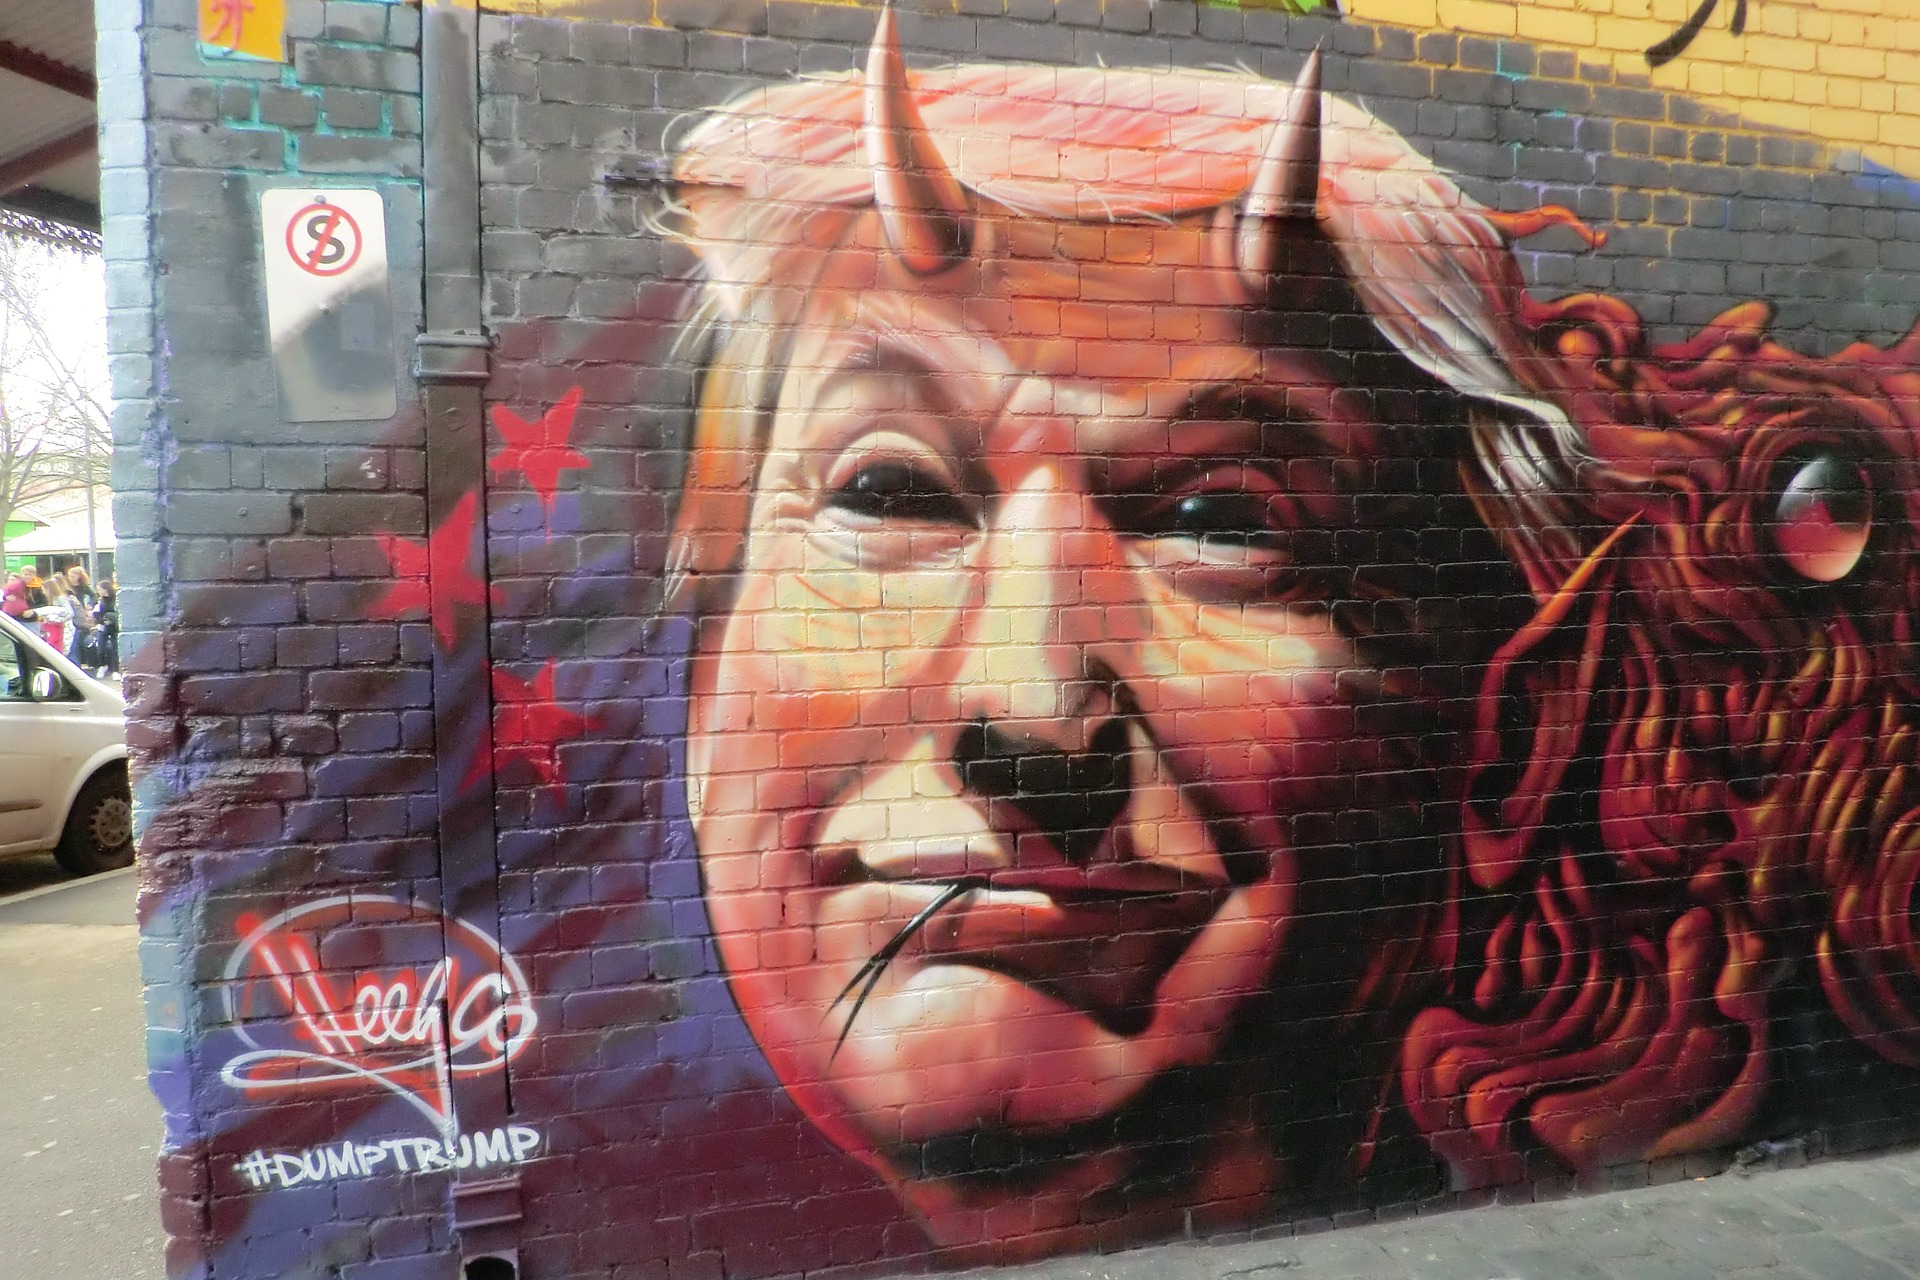 Graffiti mural depicting Donald Trump with devil horns and a mischievous expression, tagged with "#DumpTrump" and artist signature.